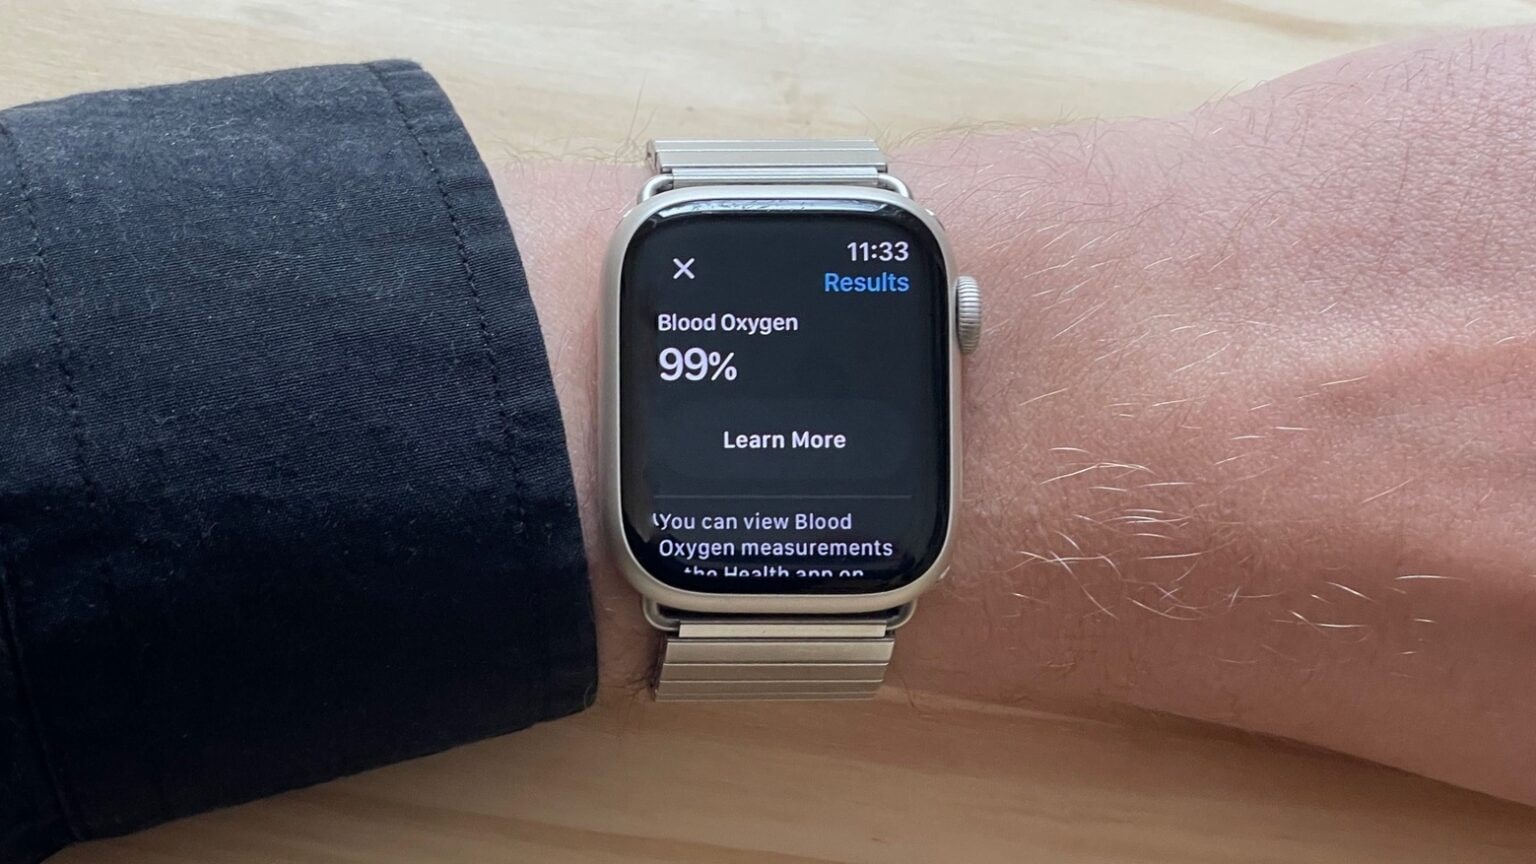 Apple Watch Series 7 running watchOS 10.3 has a fully functional Blood Oxygen app.